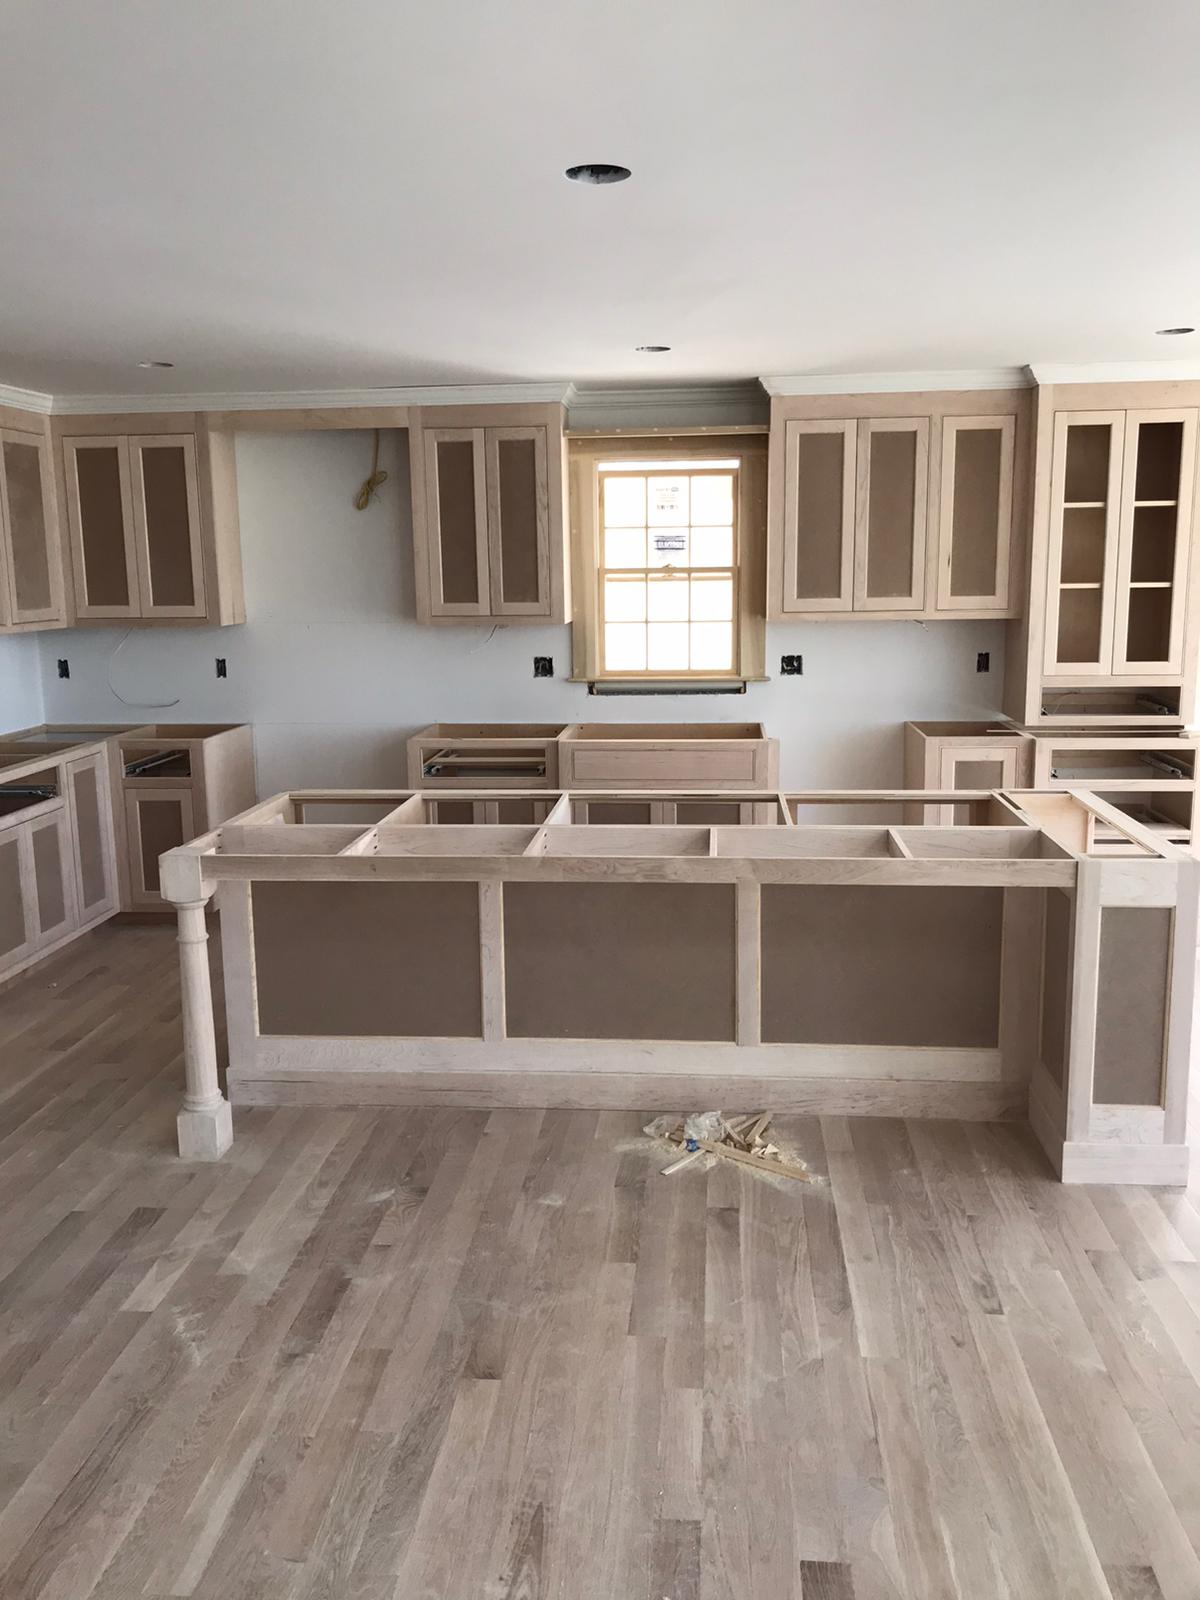 CABINETRY